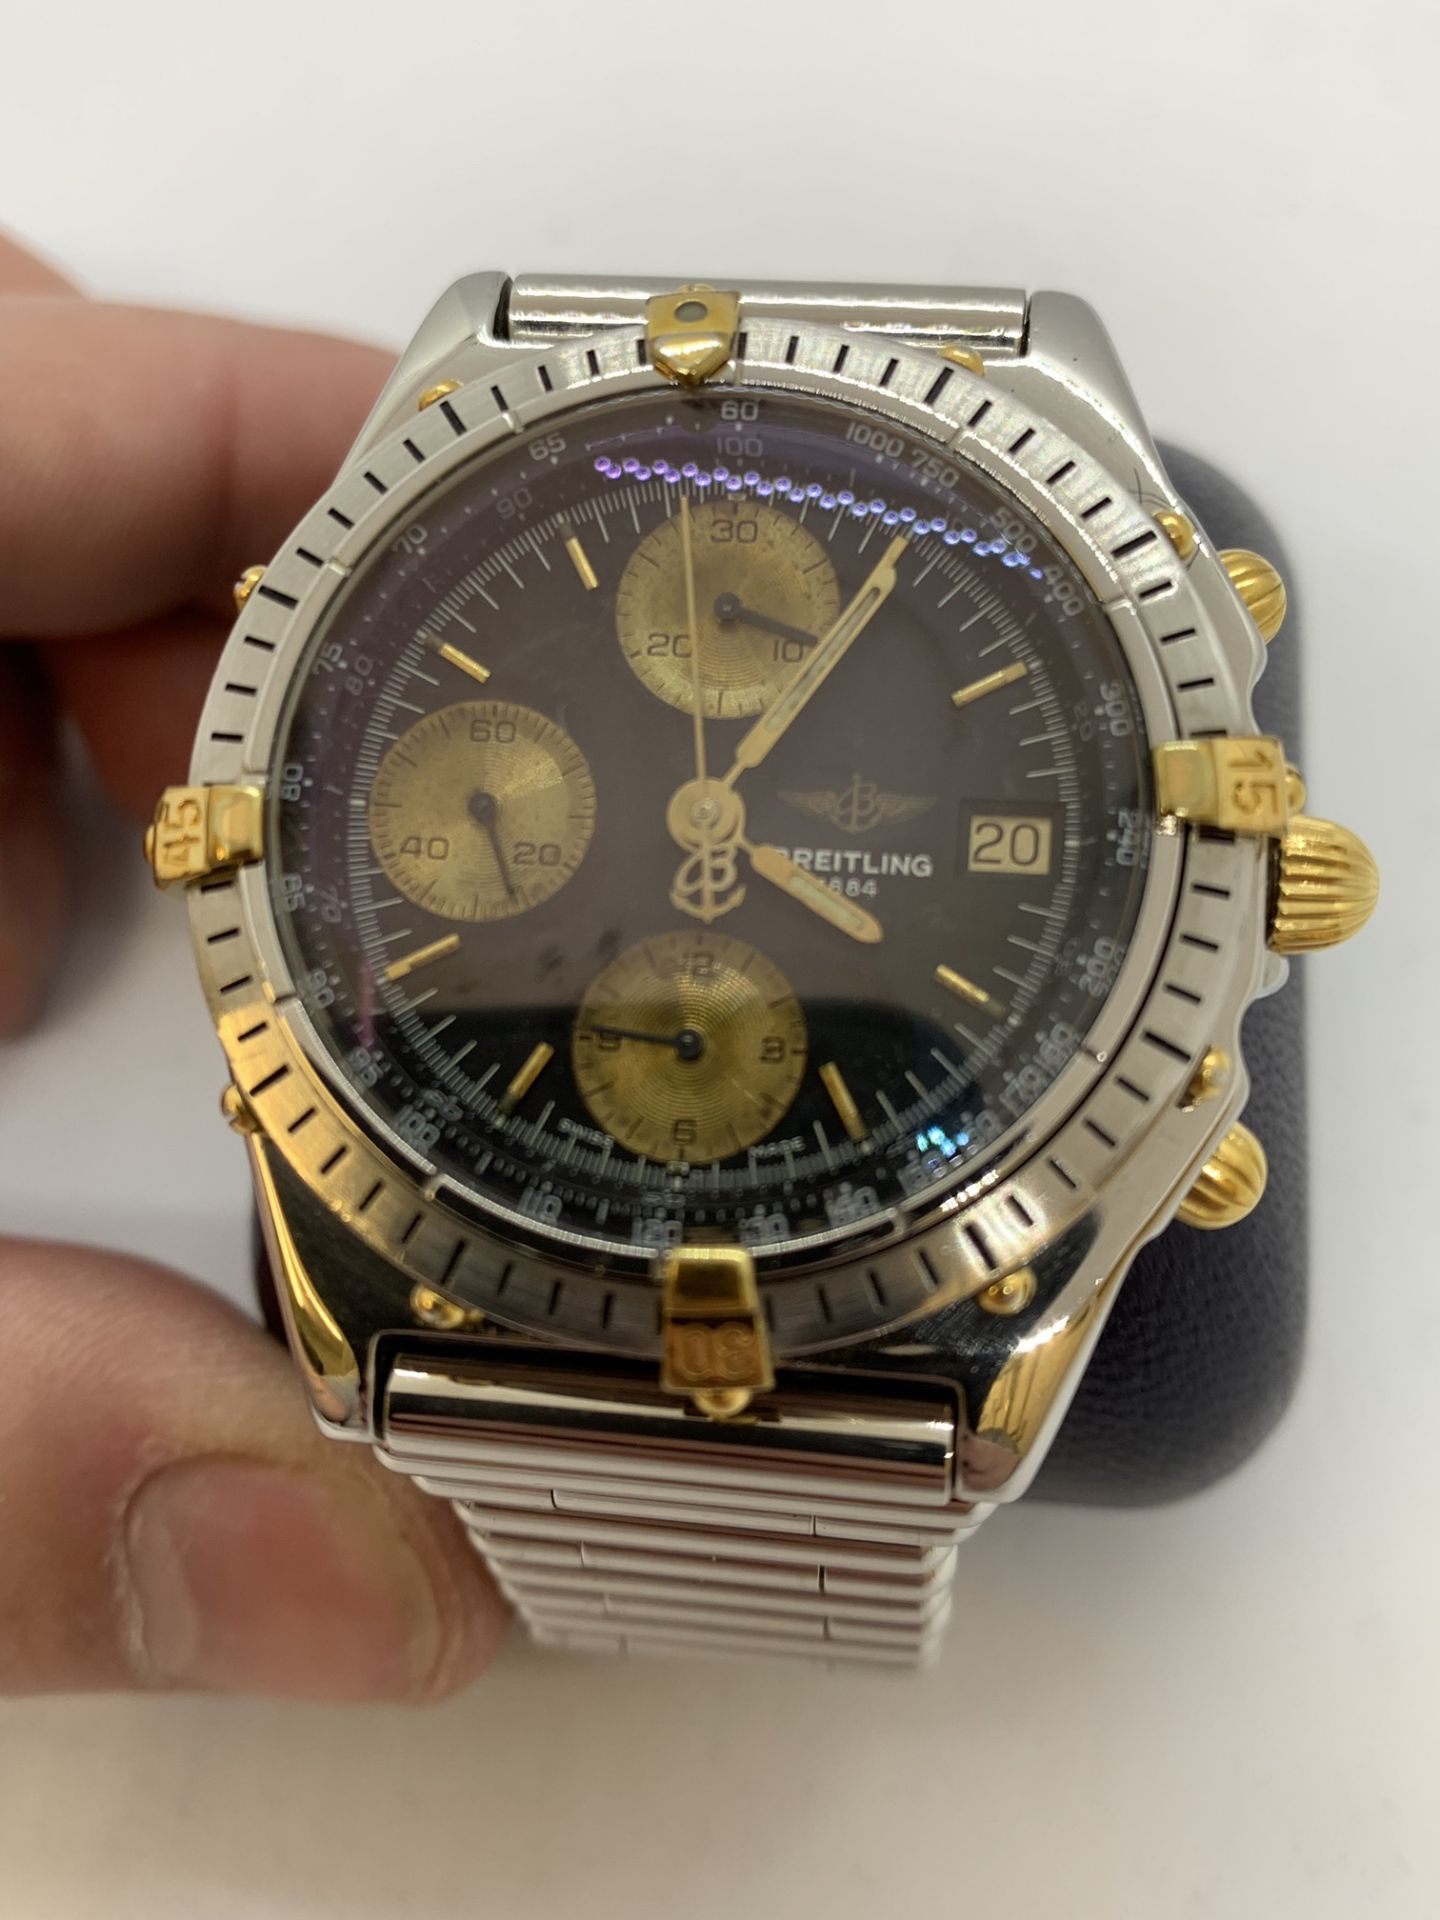 BREITLING B13047 GOLD & STAINLESS STEEL WATCH